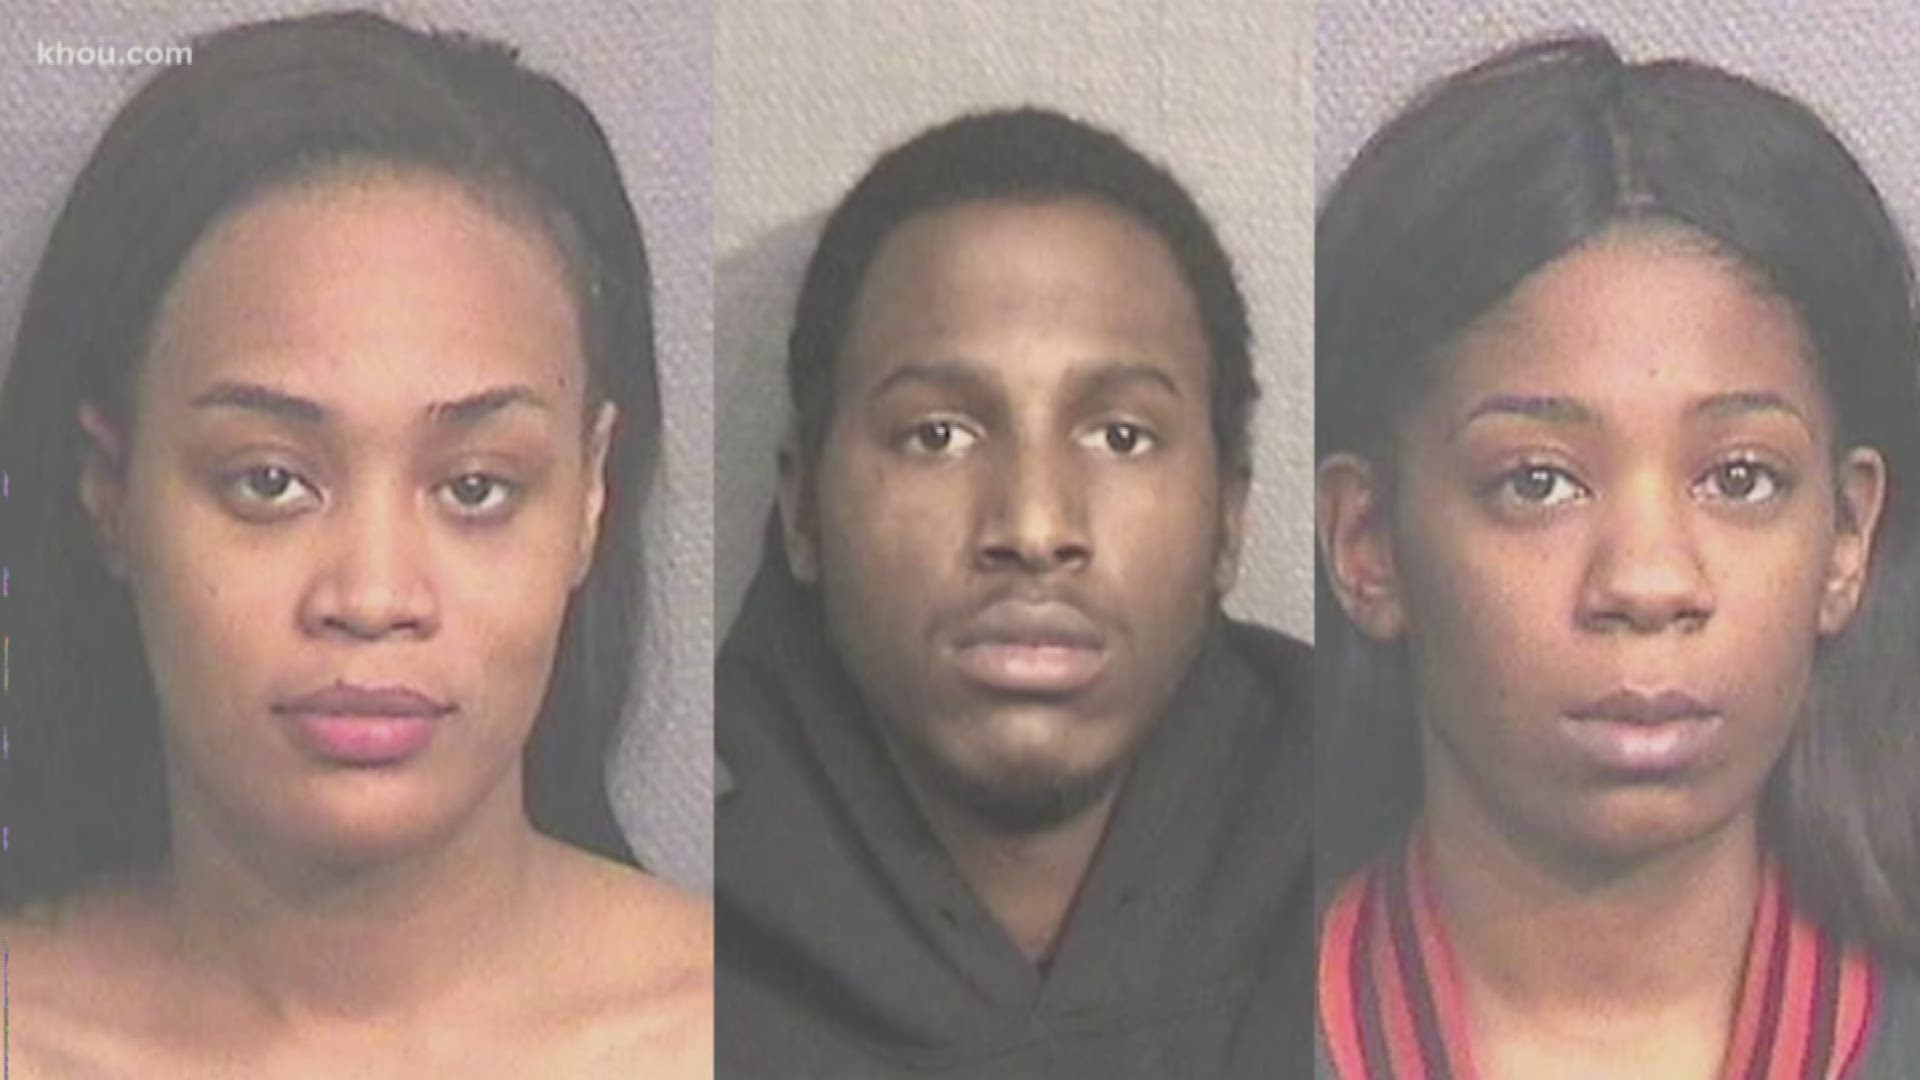 Three suspects were arrested Tuesday after police rescued a woman allegedly forced into prostitution.